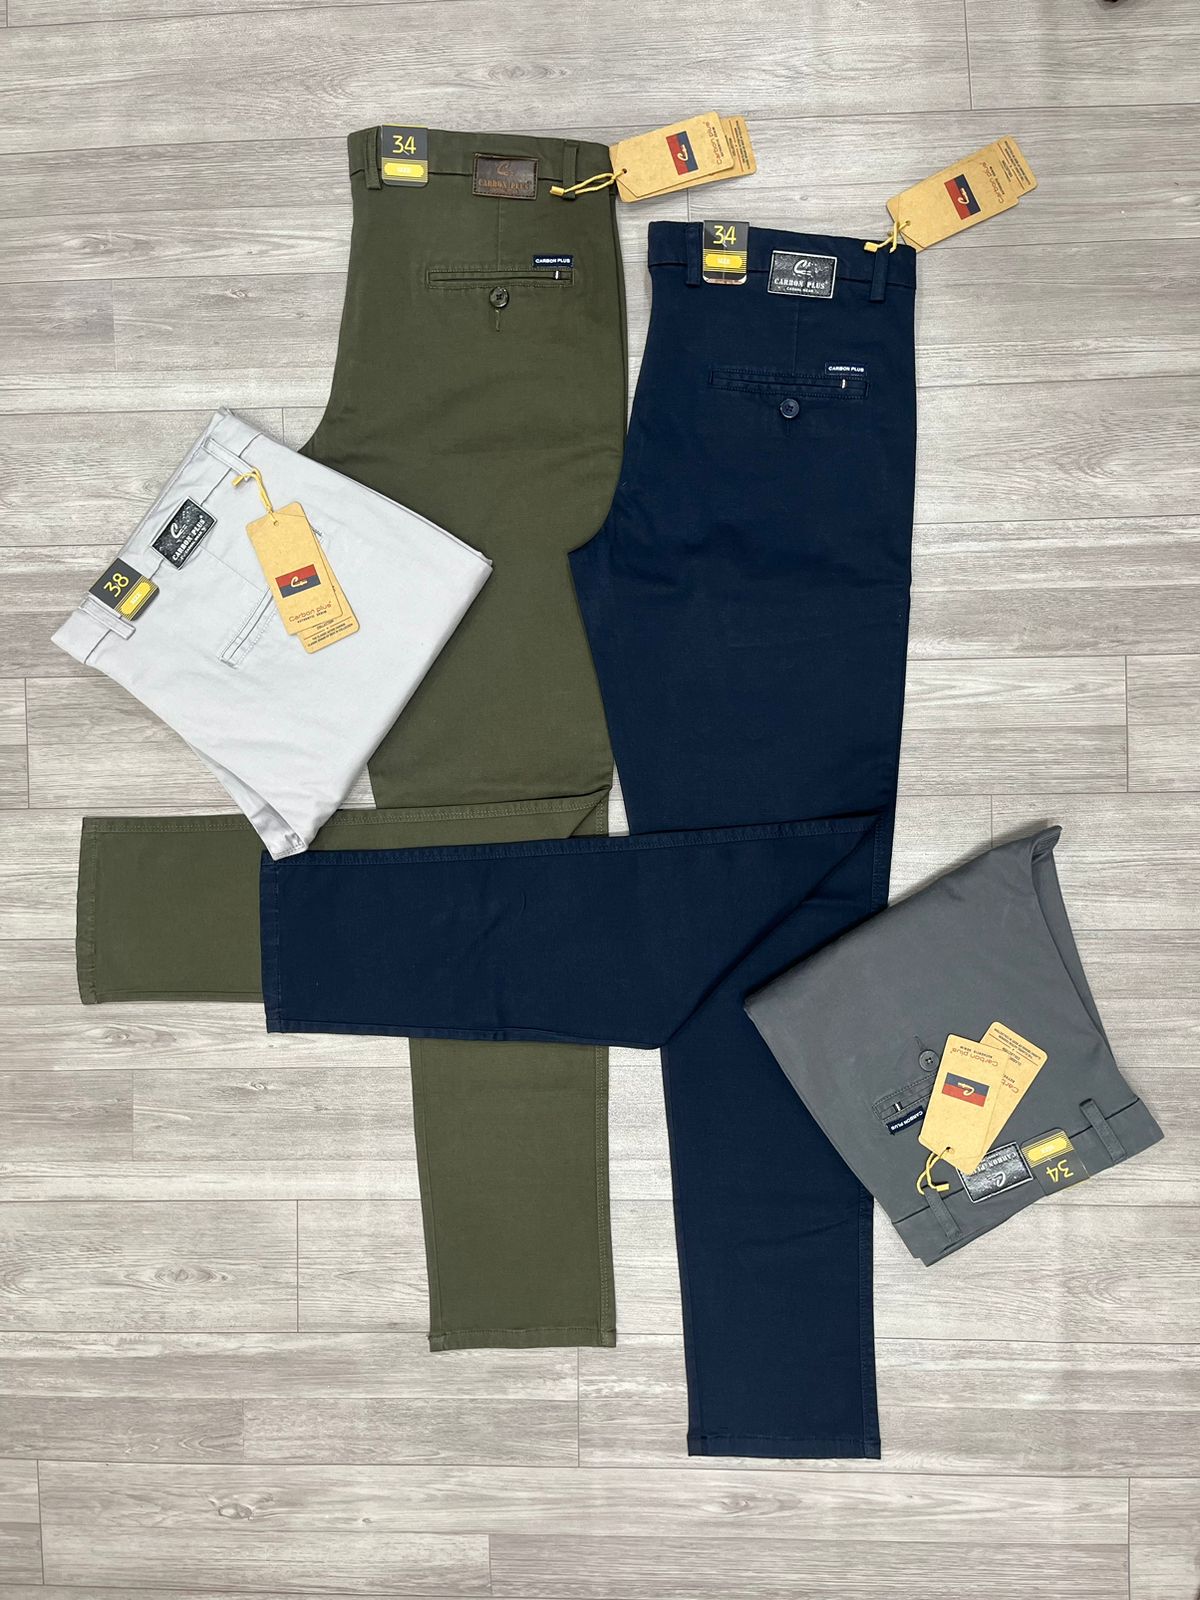 Jeep XD9 Mens Tactical Wildcraft Cargo Pants With Multi Pockets And  Military Army Style Y19042201 From Huang01, $32.22 | DHgate.Com